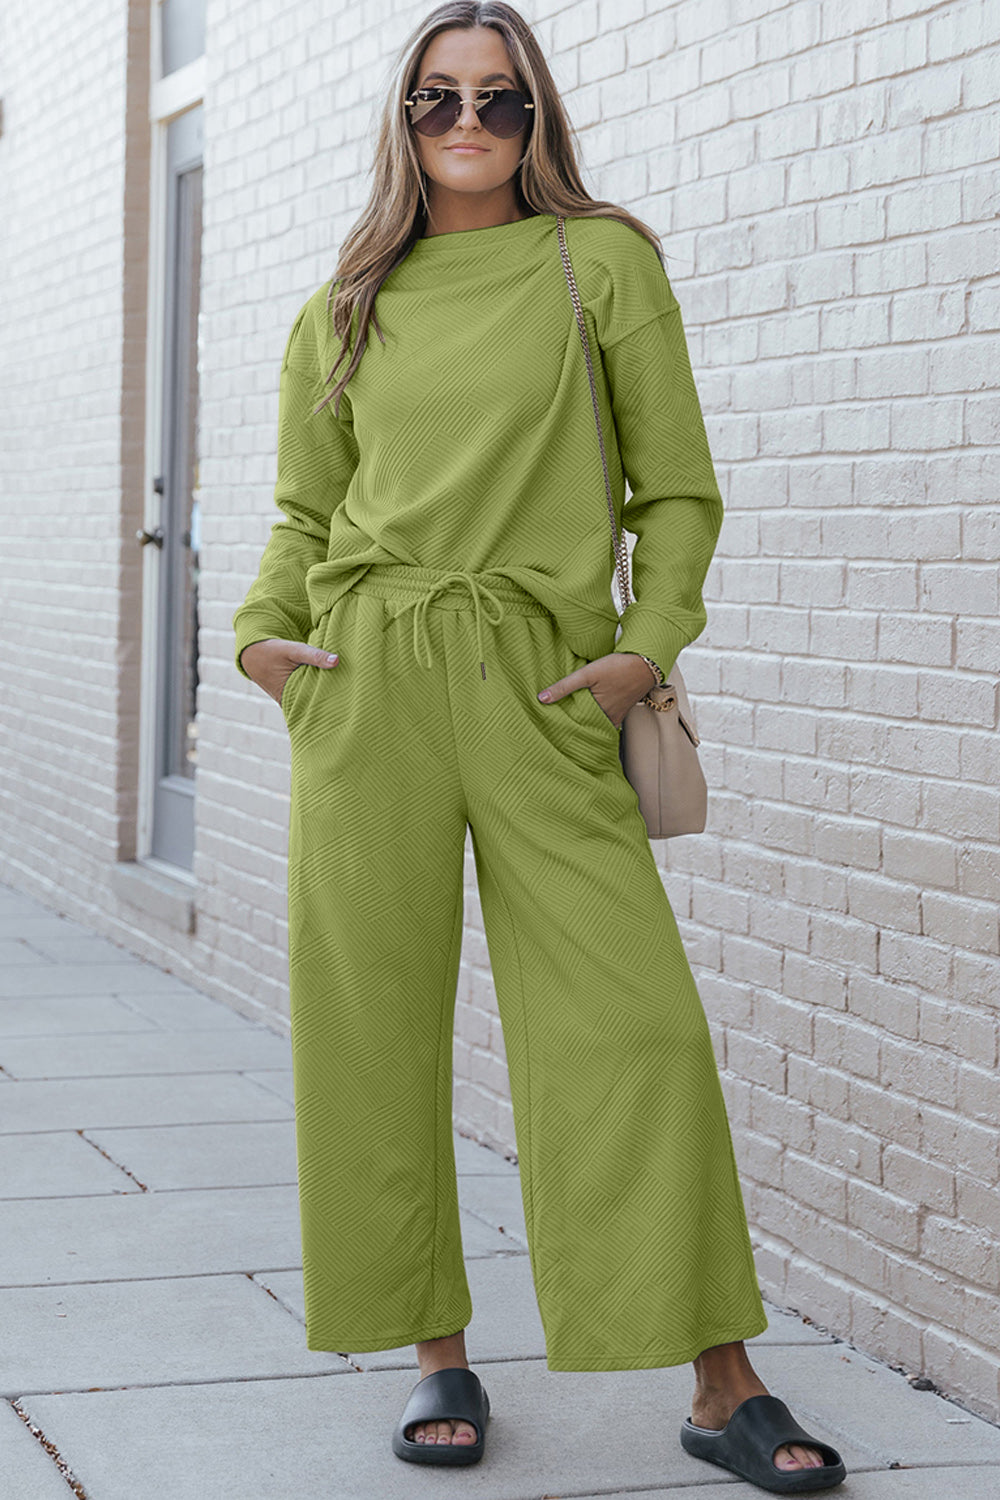 Double Take Textured Long Sleeve Top and Drawstring Pants Set - 10 color options!